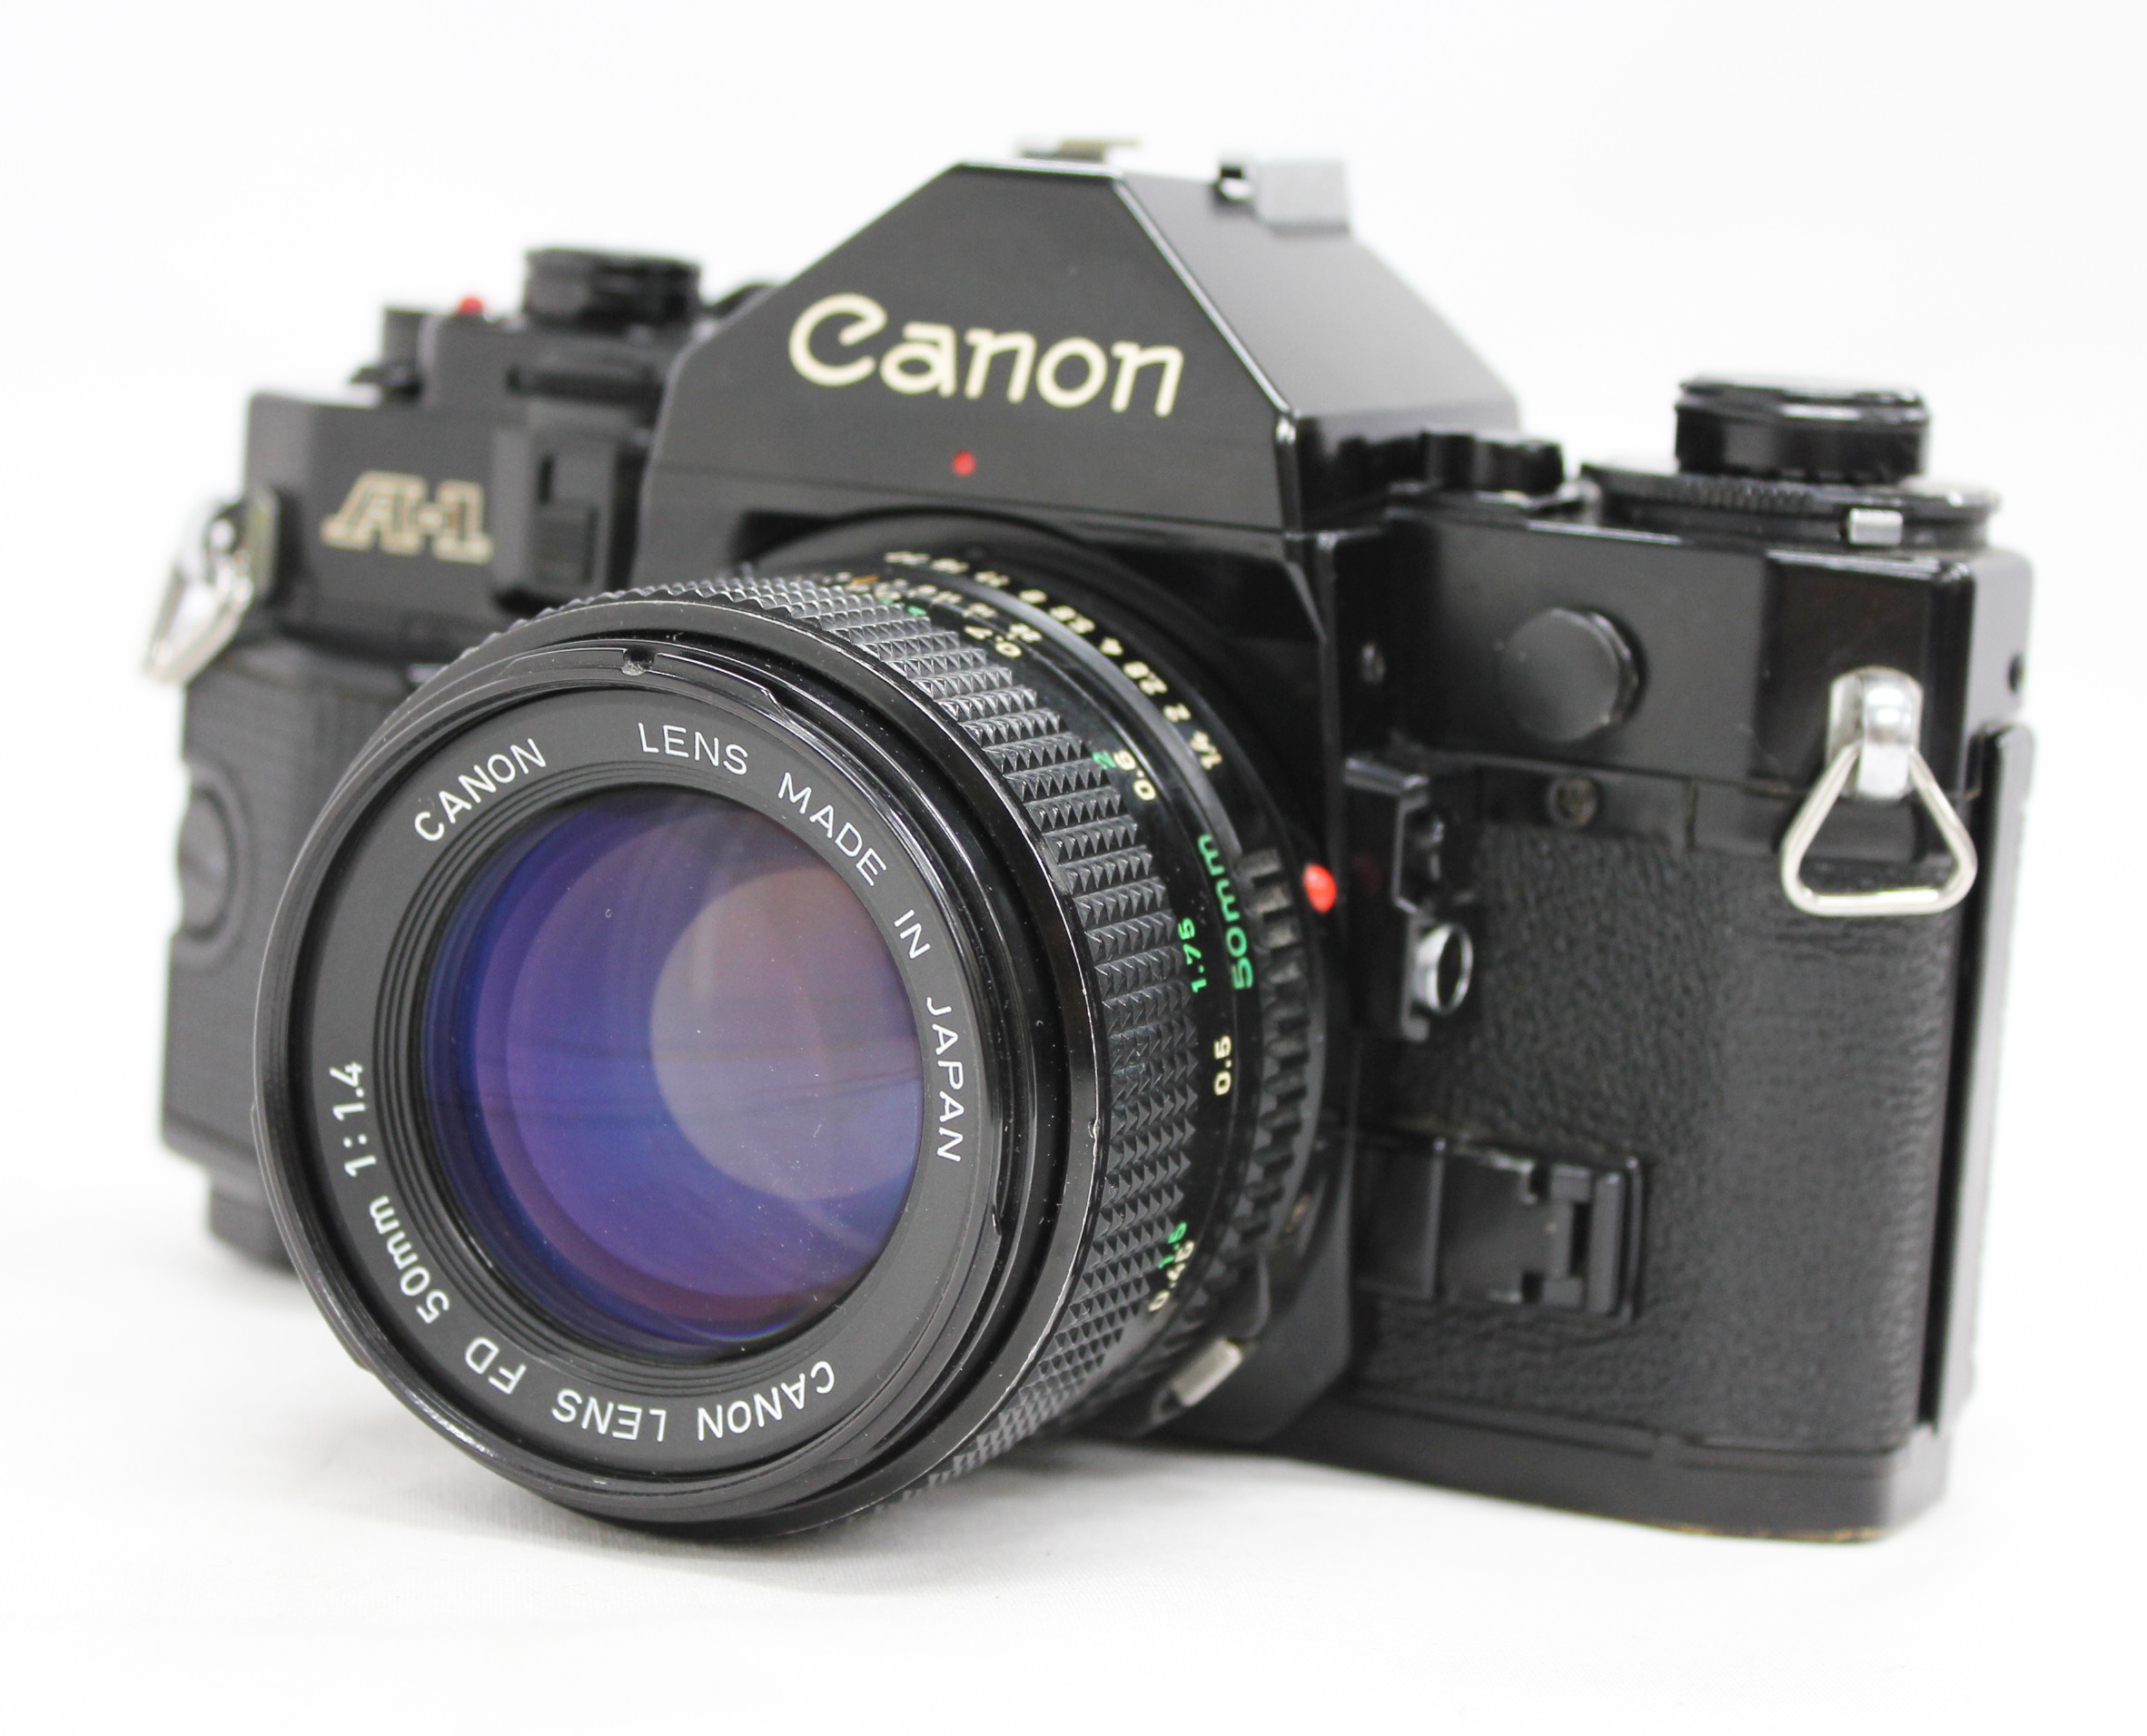 Japan Used Camera Shop | [Exc++++] Canon A-1 35mm SLR Film Camera with New FD 50mm F/1.4 Lens from Japan